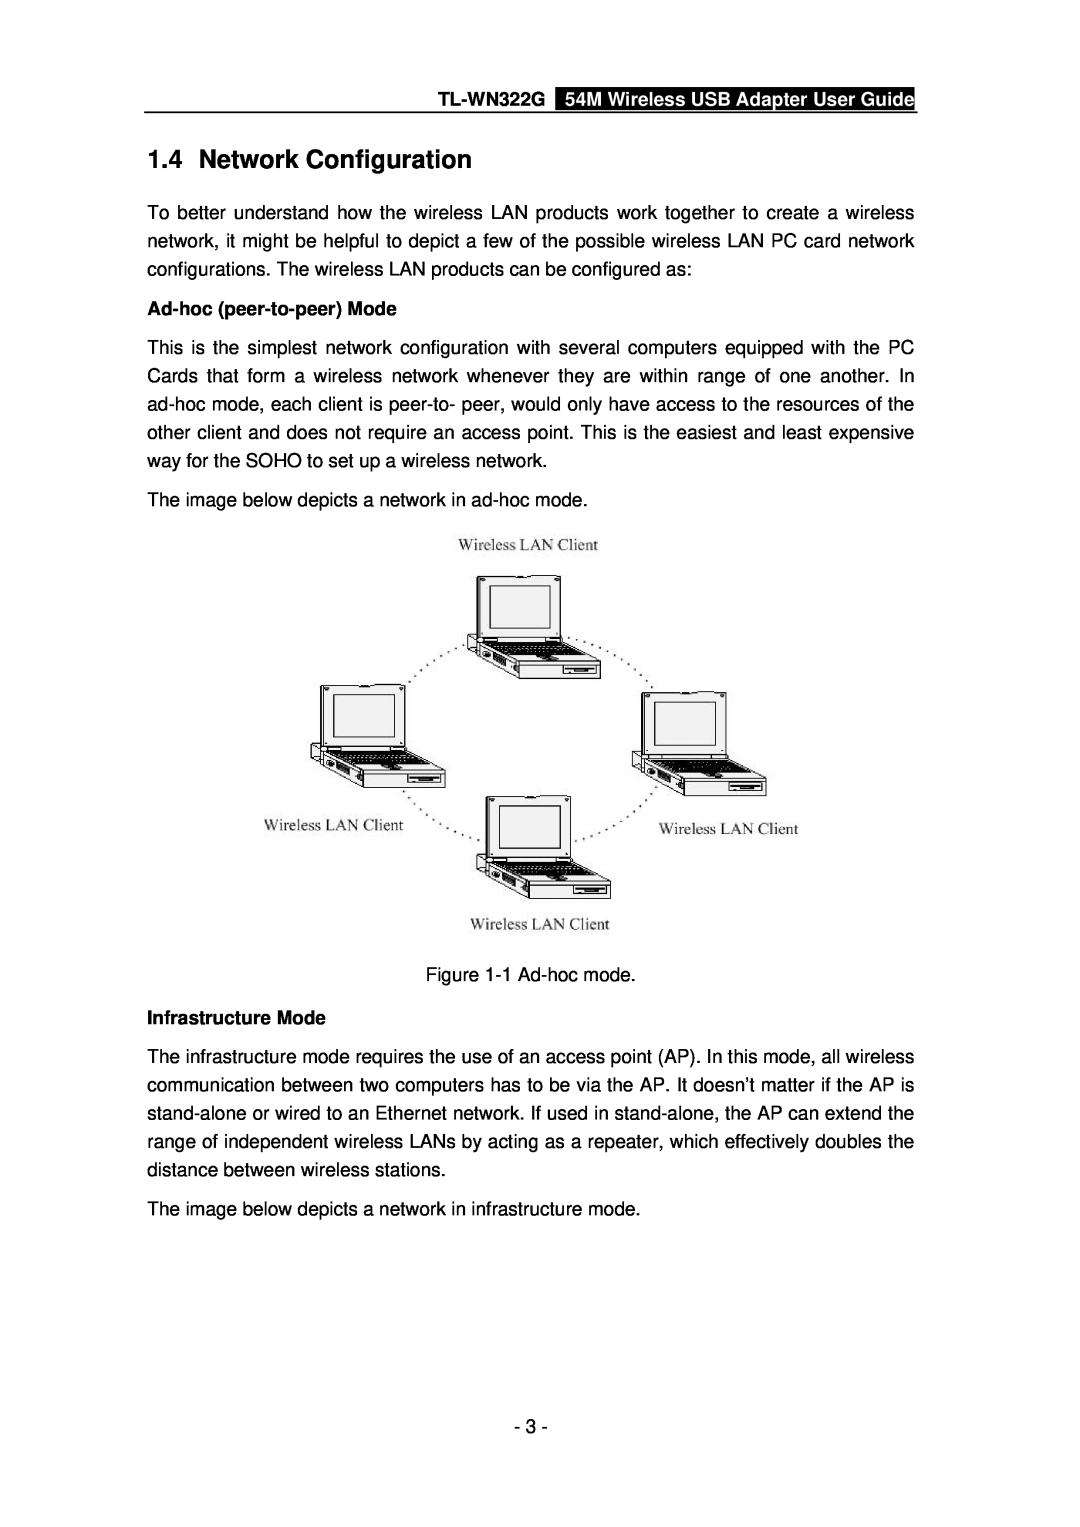 TP-Link TL-WN322G manual Network Configuration, Ad-hoc peer-to-peer Mode, Infrastructure Mode 